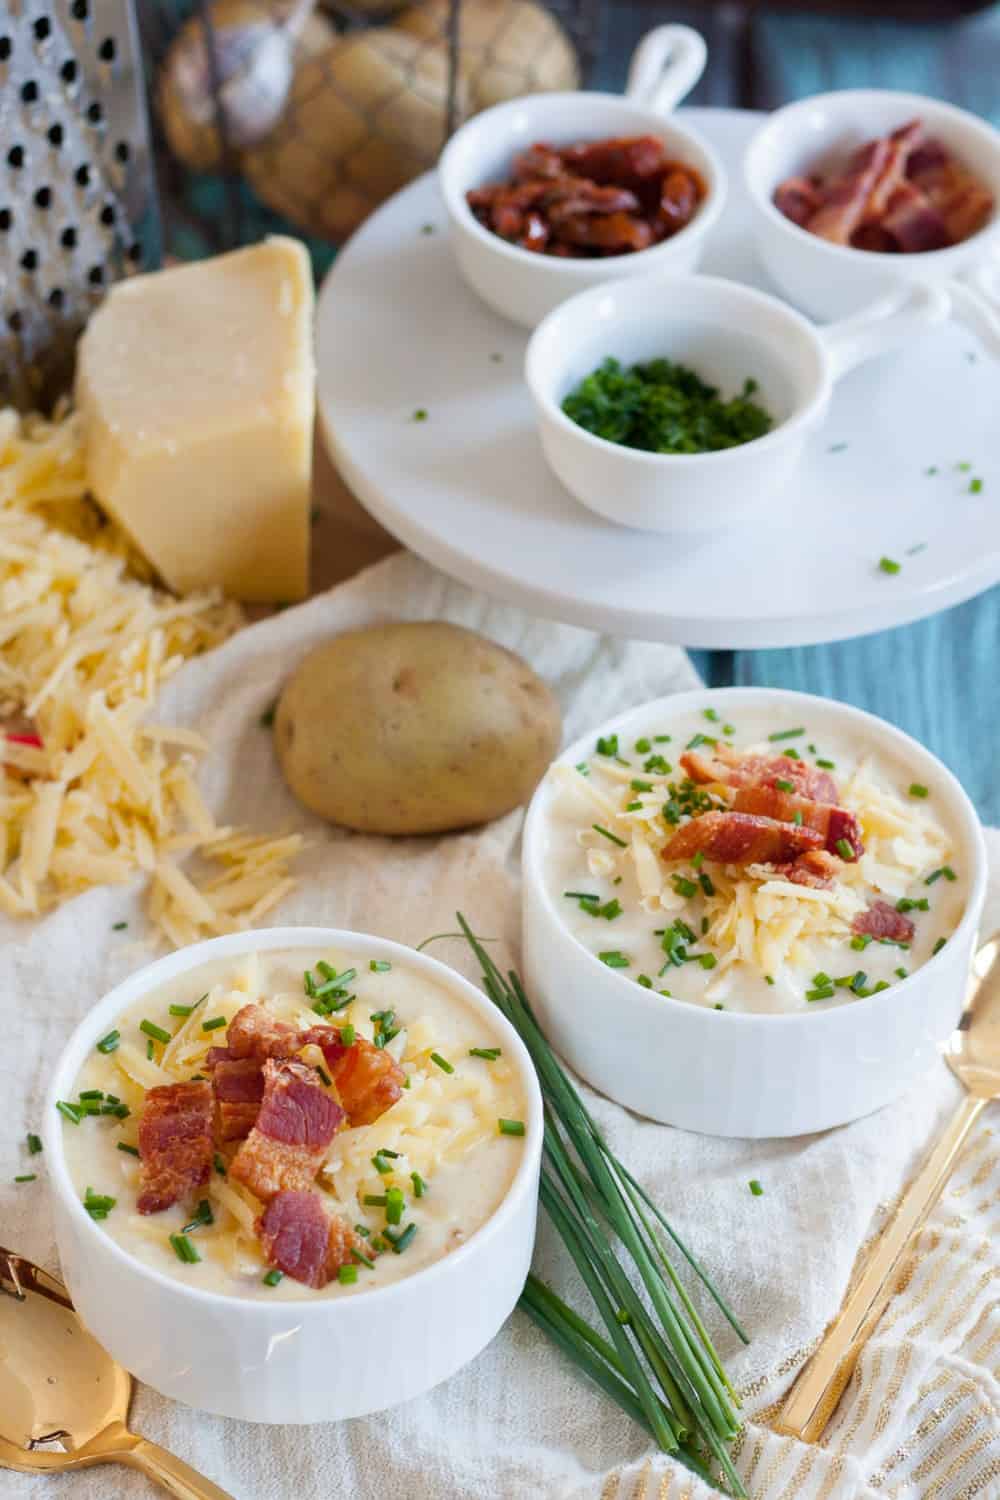 A classic comforting soup recipe, this Yukon Gold baked potato soup is a family favorite!